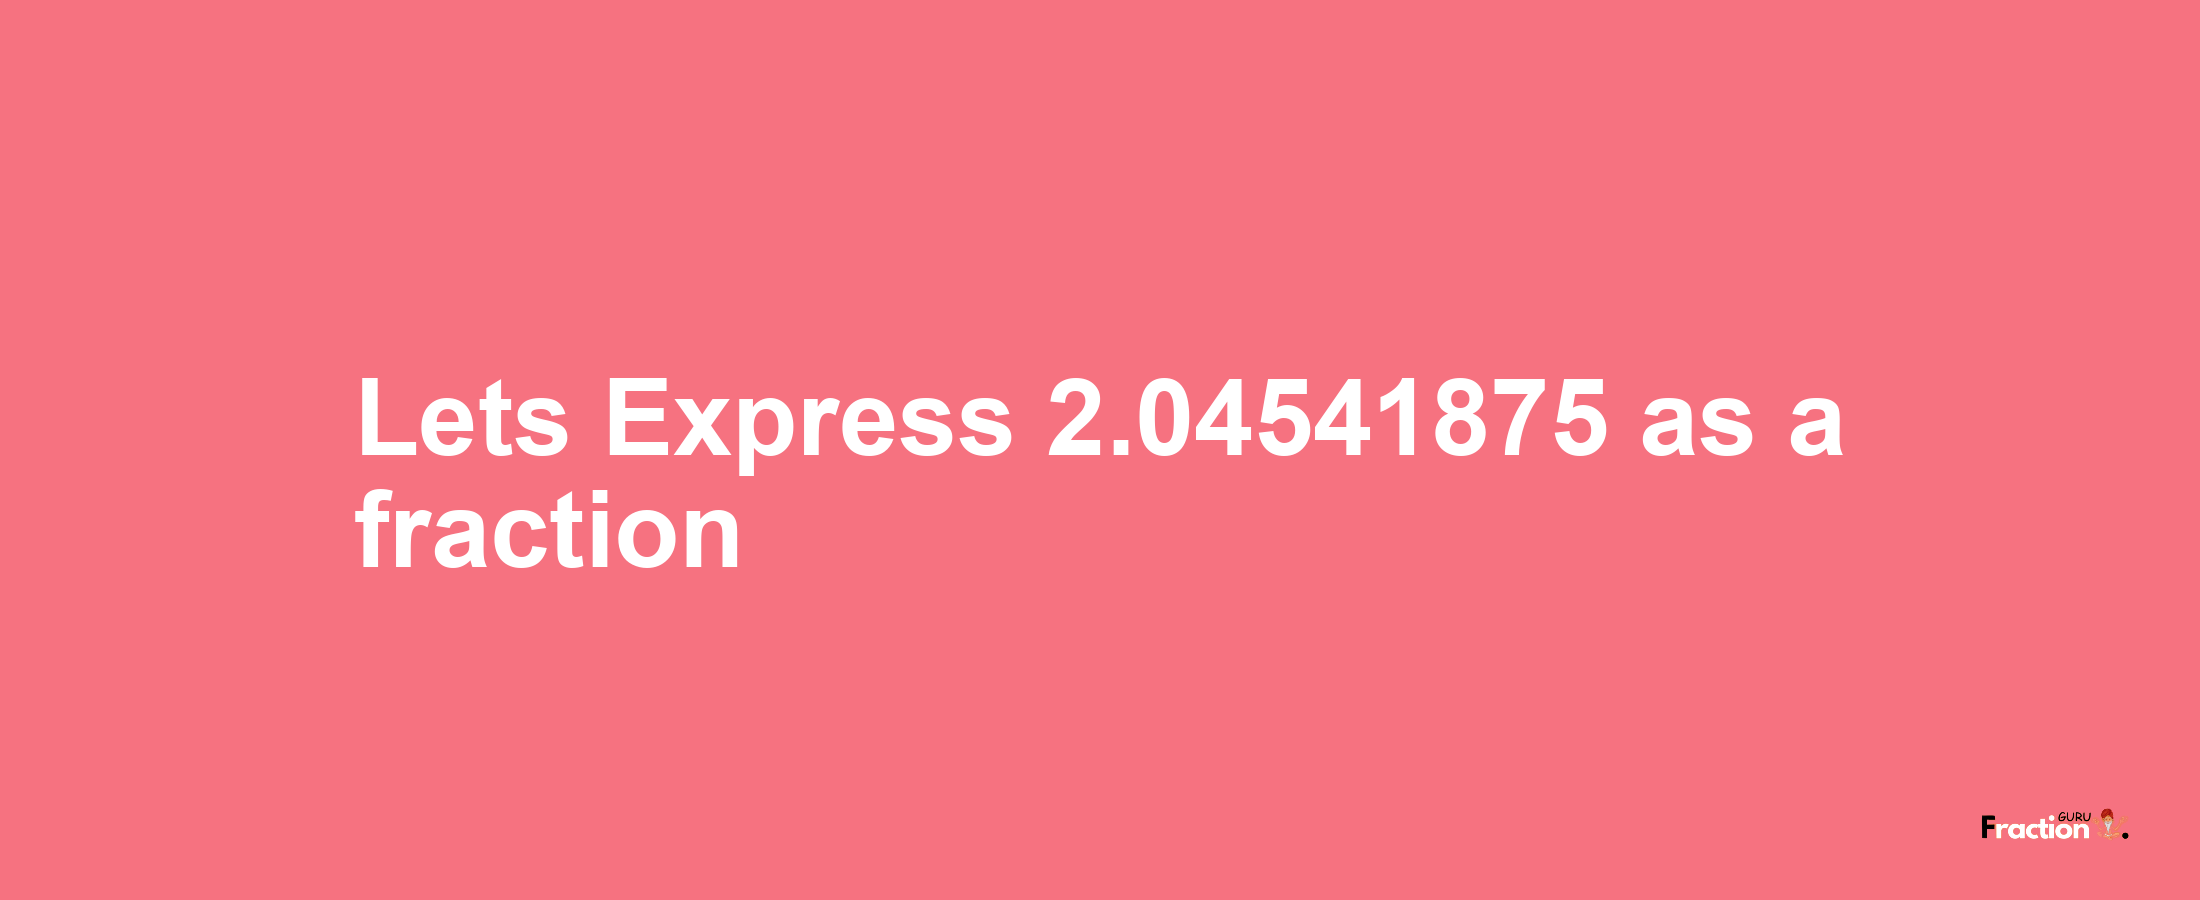 Lets Express 2.04541875 as afraction